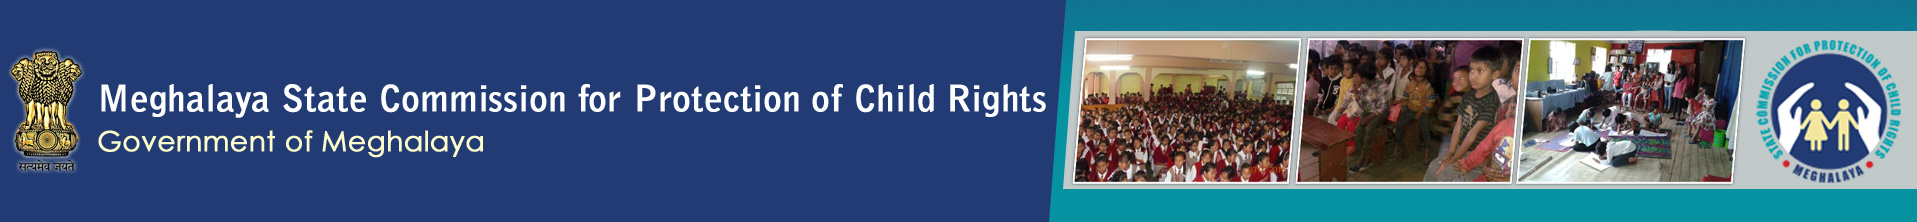 Meghalaya State Commission for Protection of Child Rights